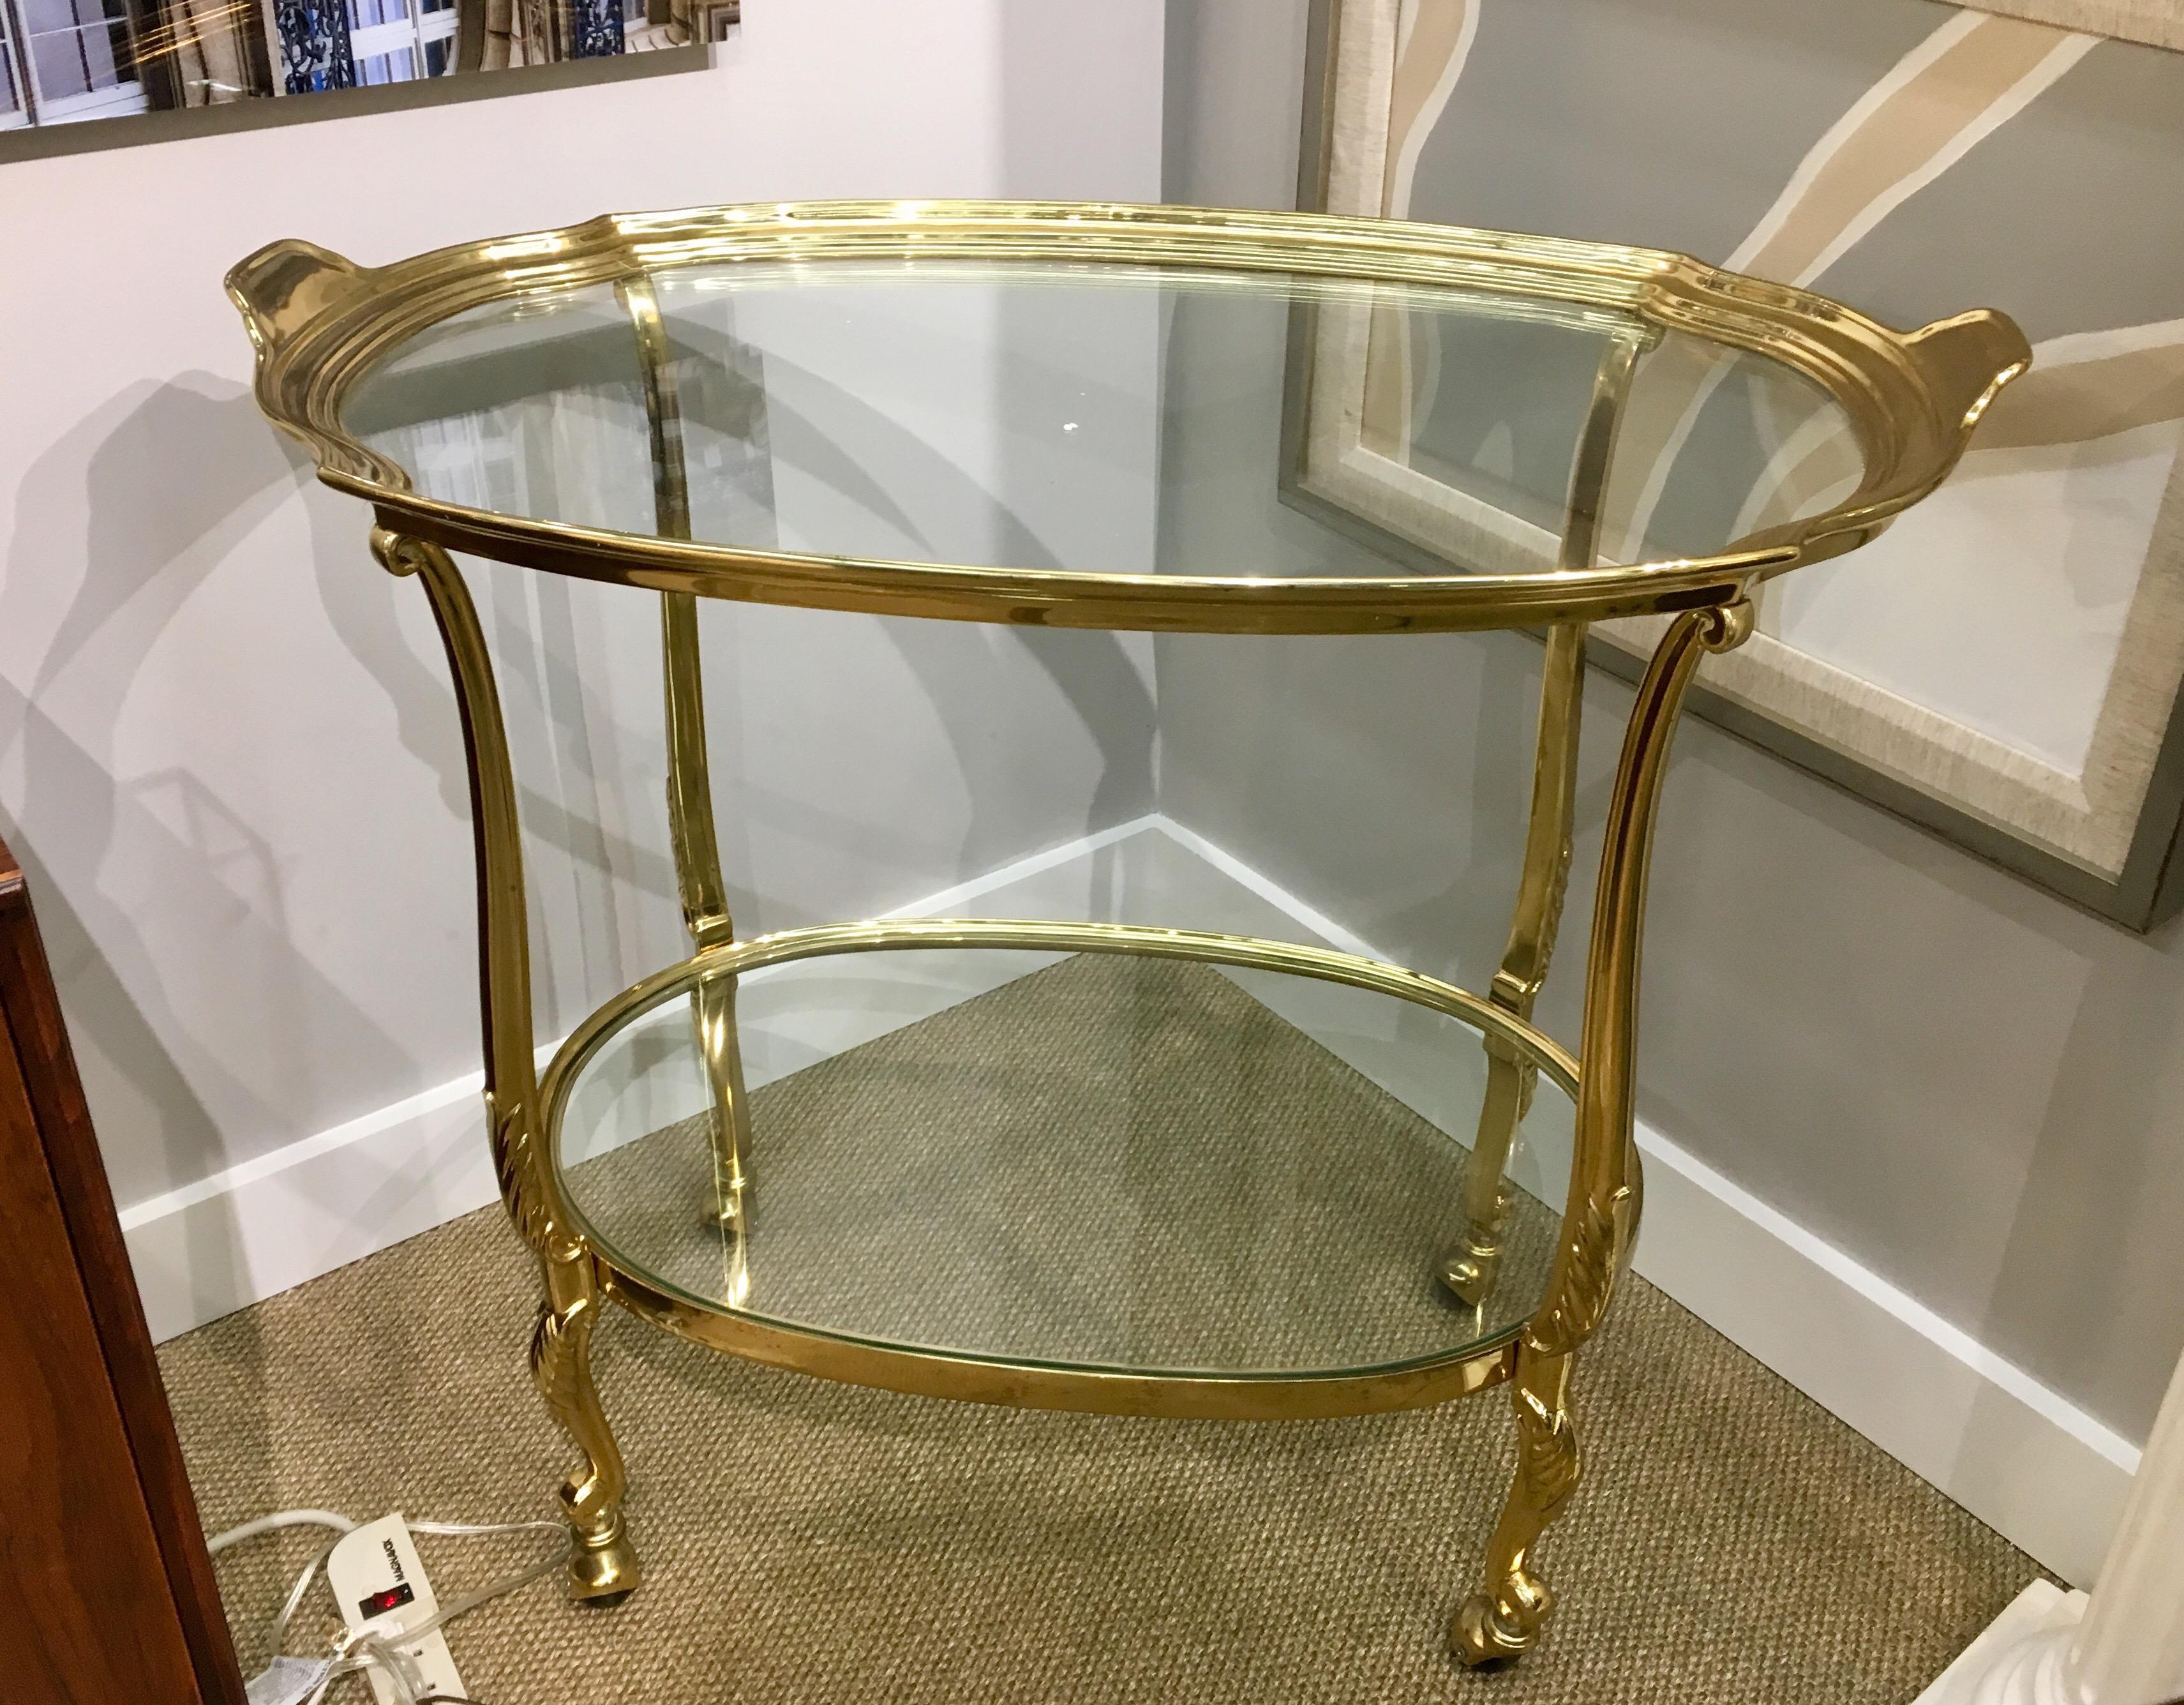 Heavy, all brass bar cart with two tiers of glass. Made in France, 1960s.